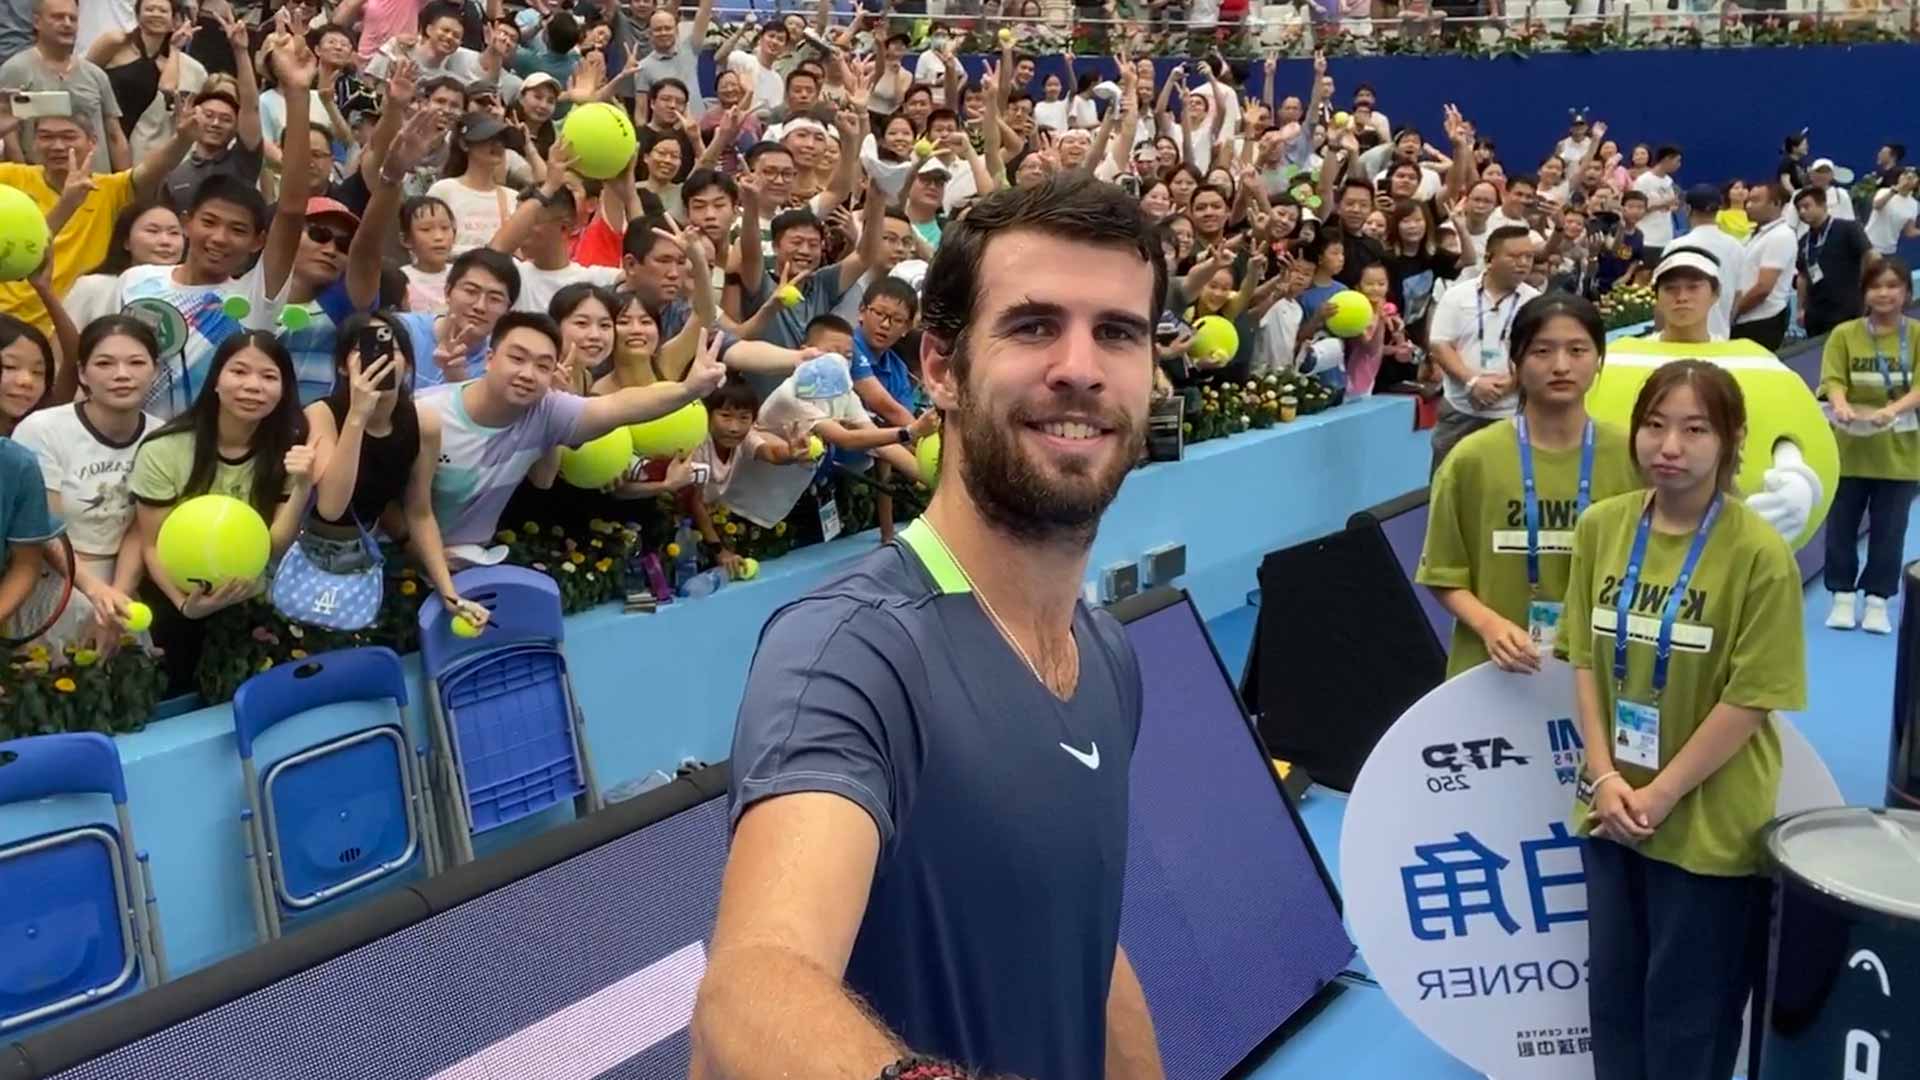 Karen Khachanov is the top seed at the ATP 250 event in Zhuhai.